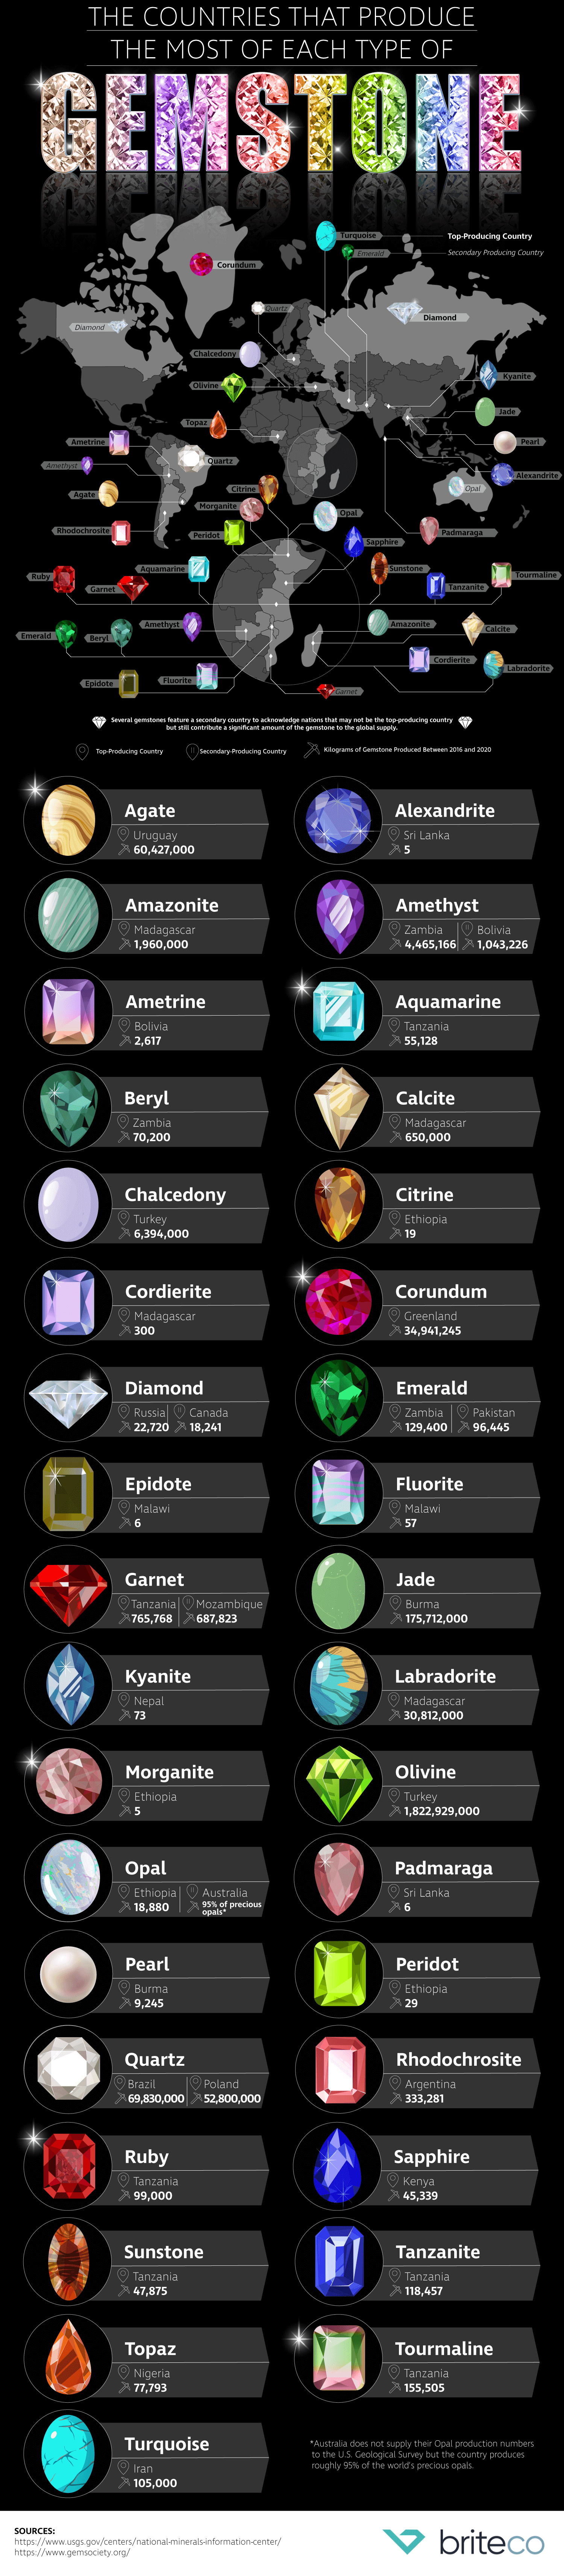 countries-produce-most-each-gemstone